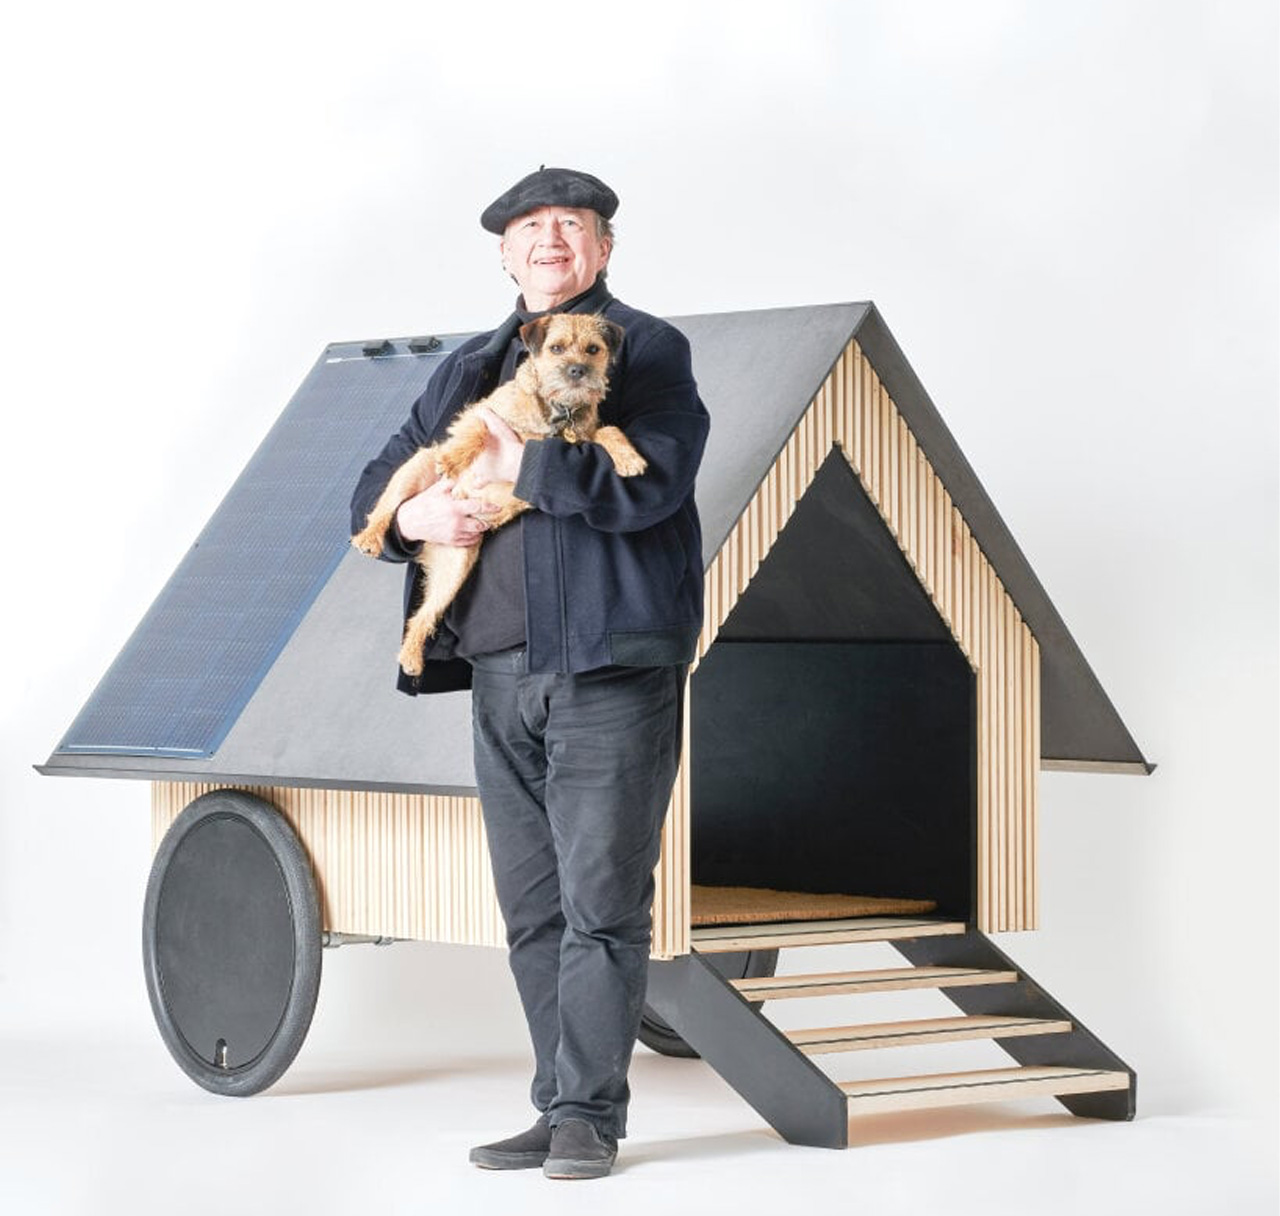 Wooden hut on wheels is the ultimate dog house to help doggos live a nomadic life on the go